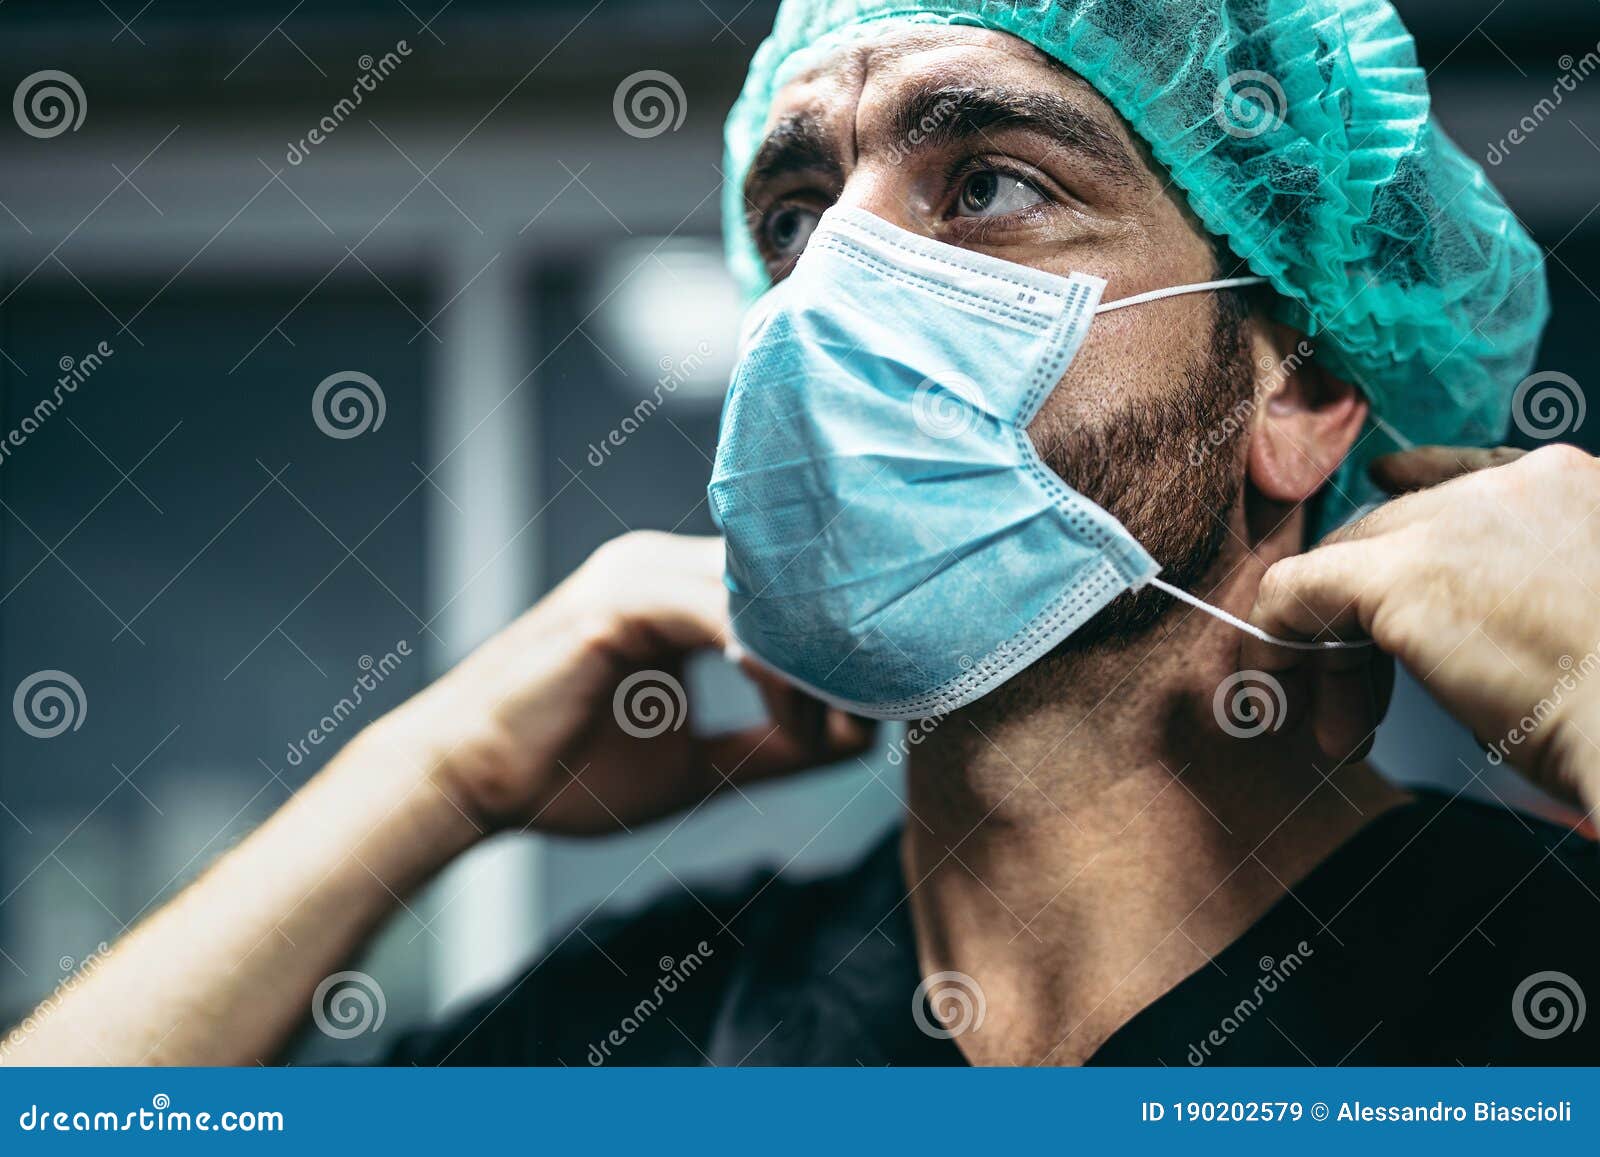 surgeon preparing for surgical operation - medical workers the real heroes during corona virus outbreak